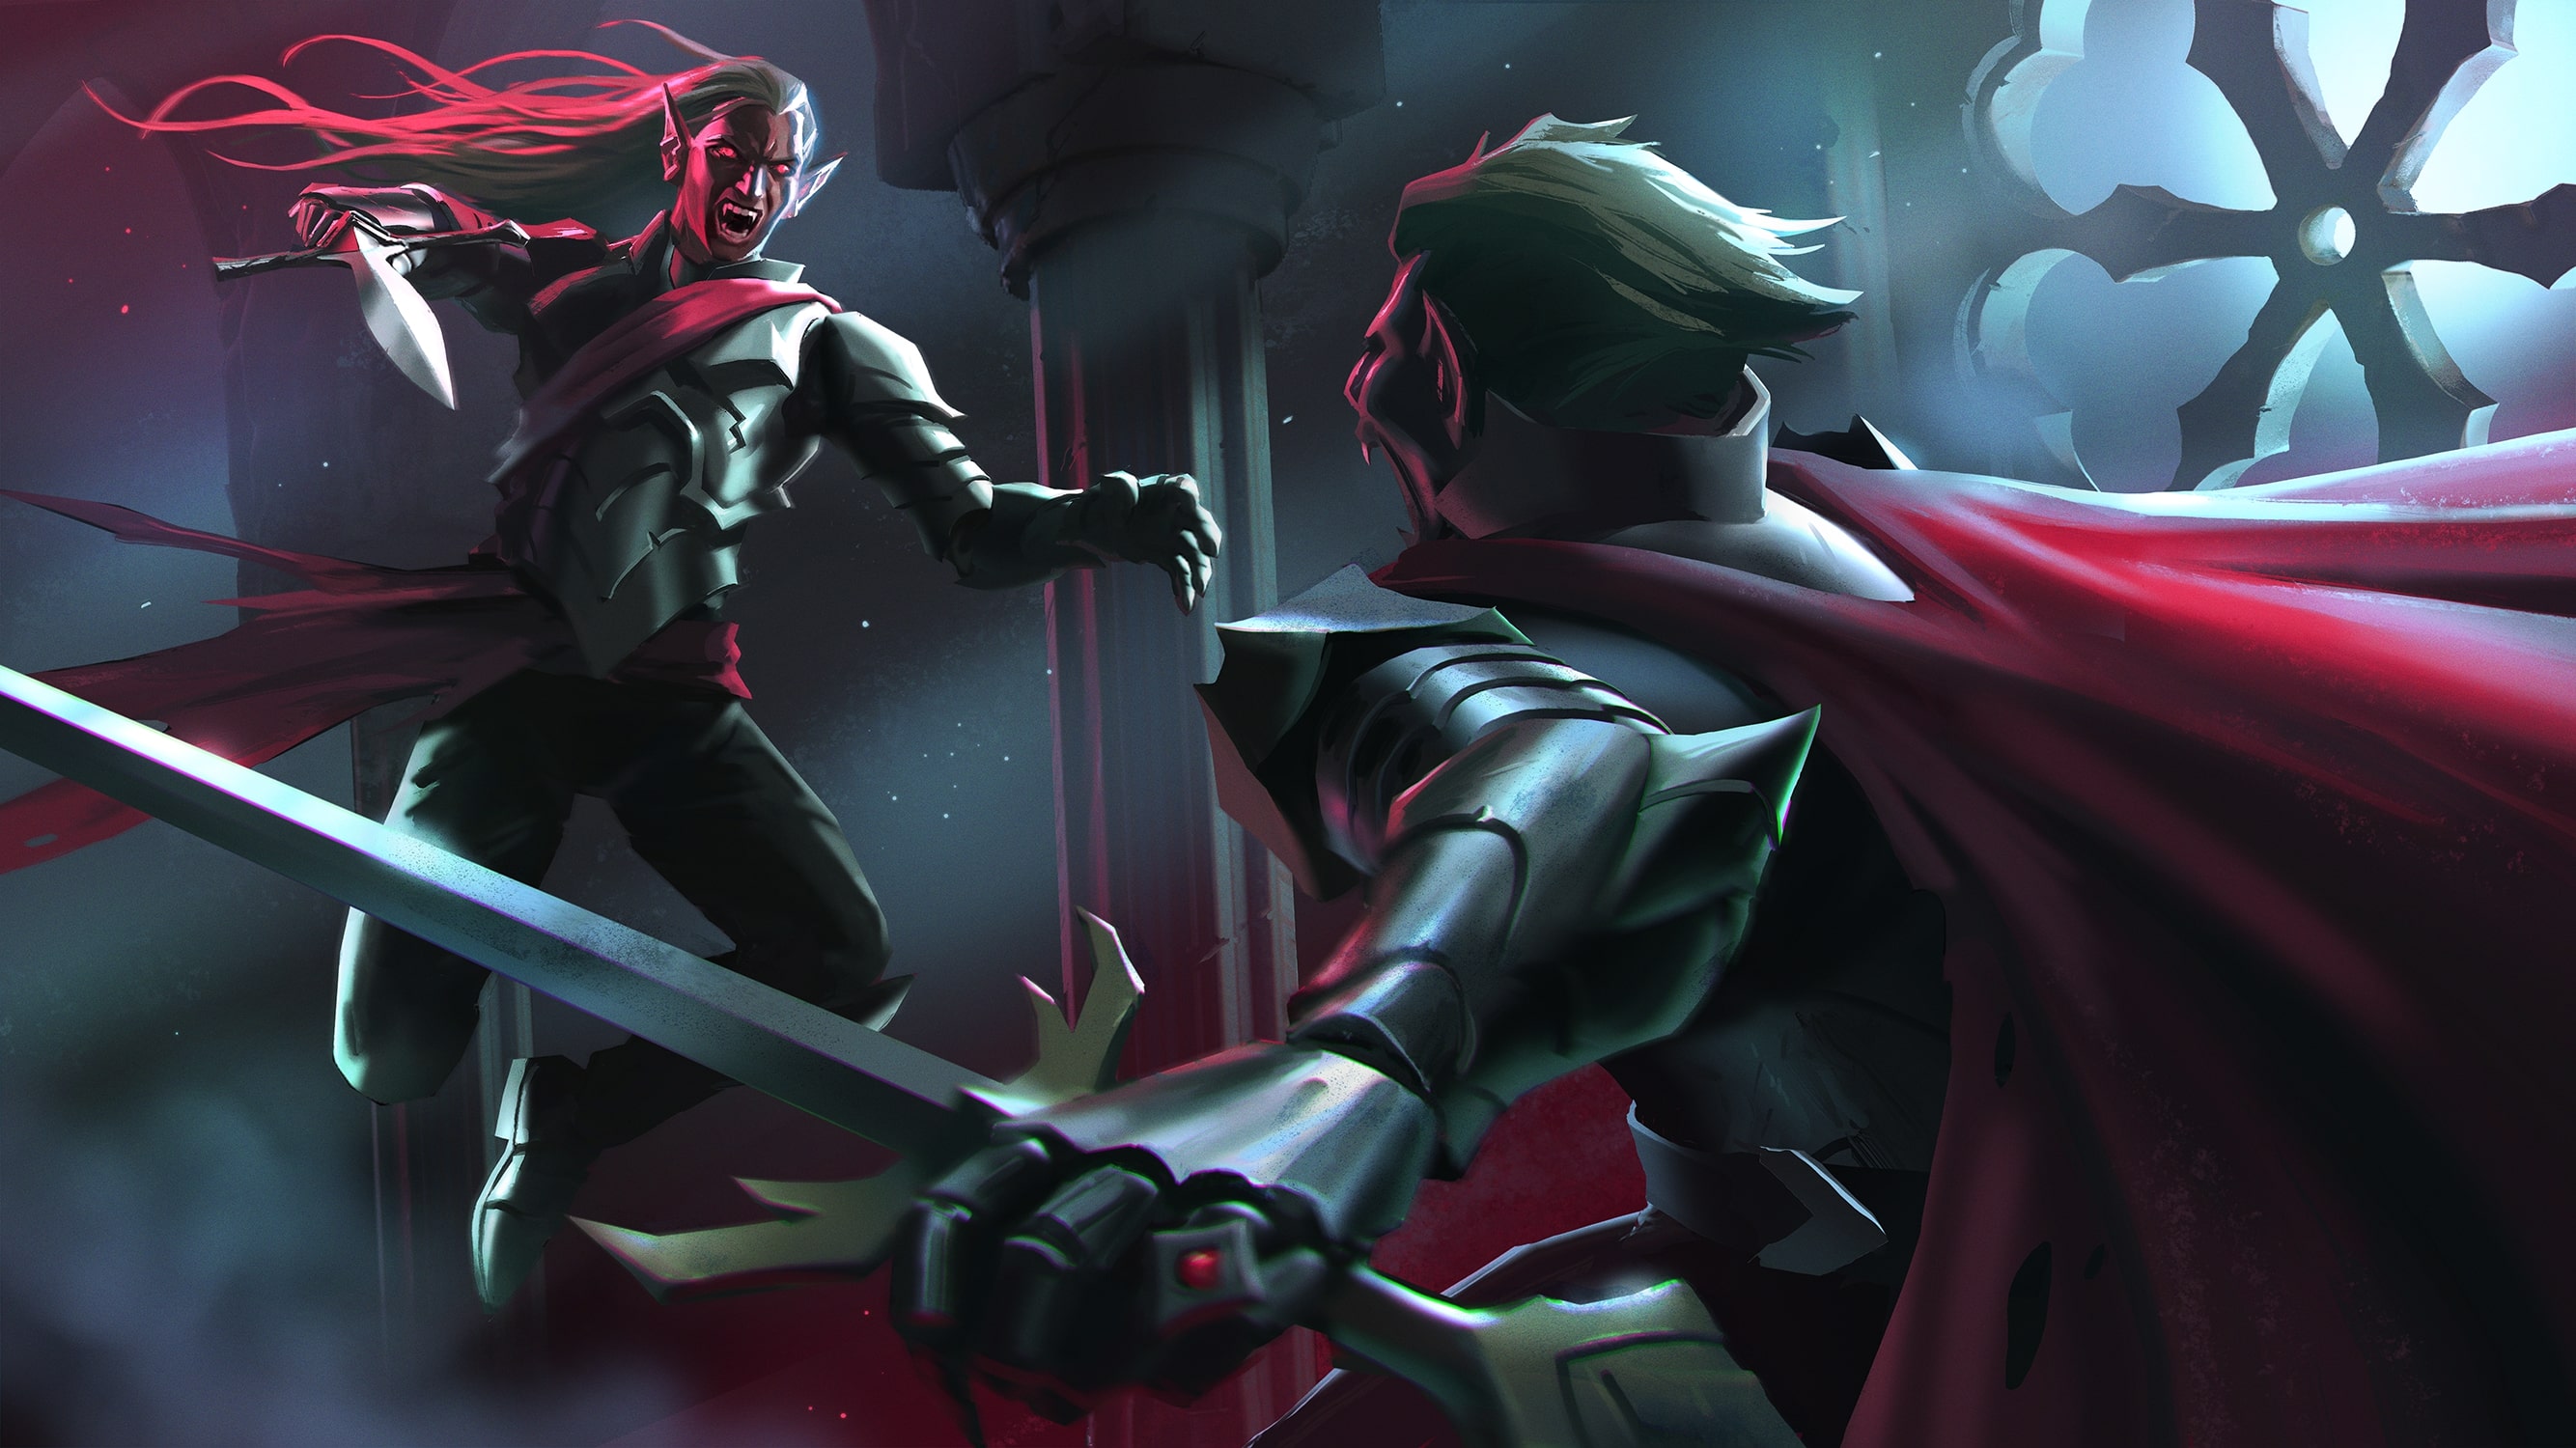 Two vampire knights dueling.